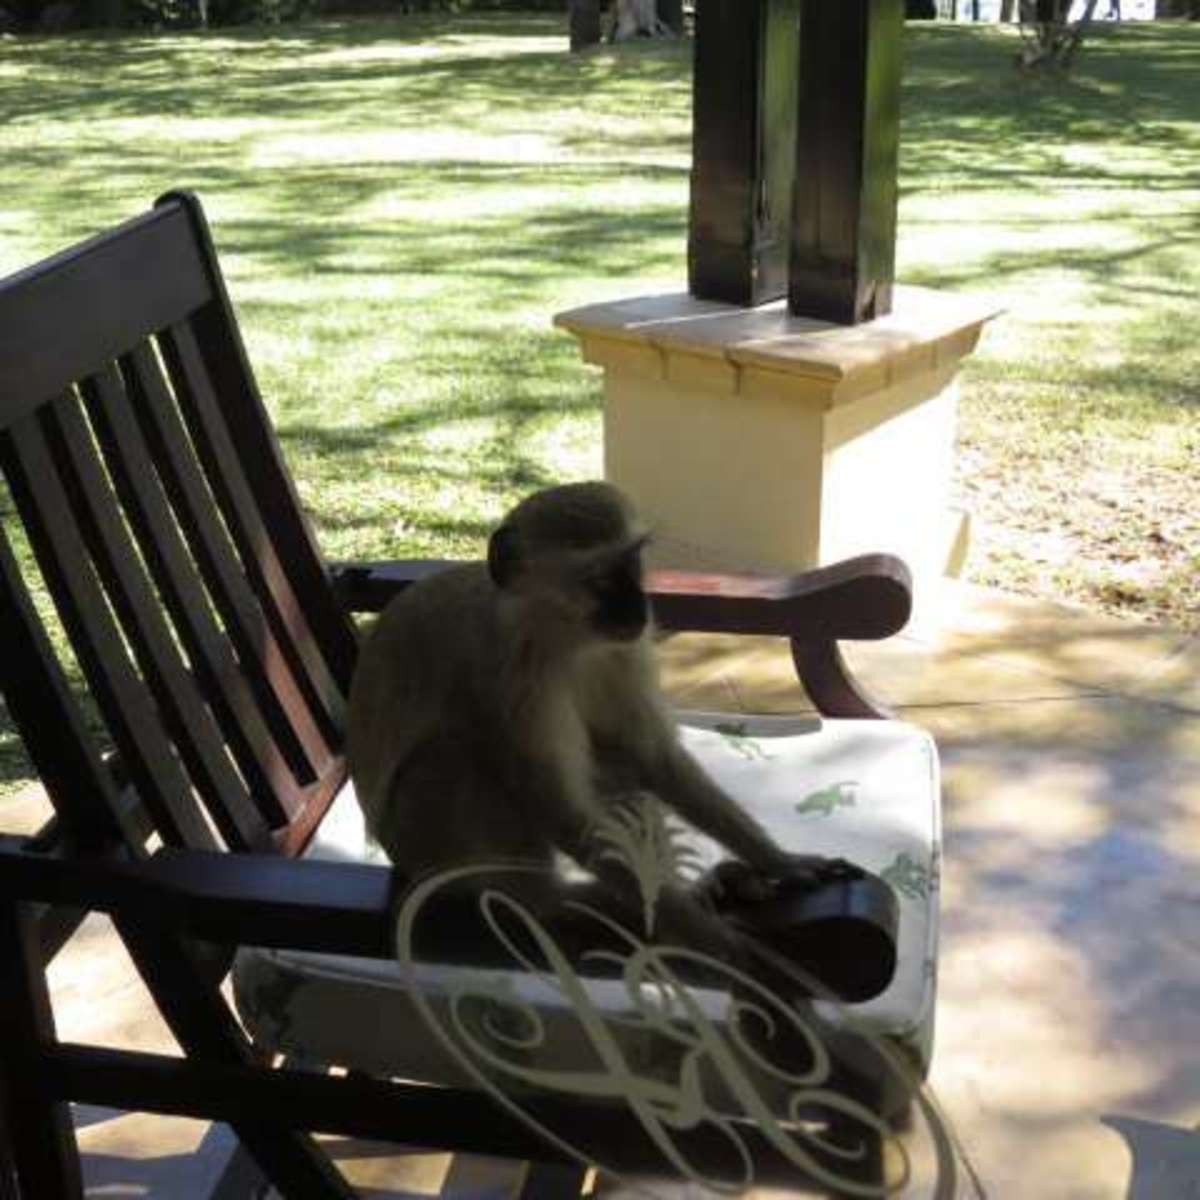 And the Monkey said " I'm Here for Coffee, Is It Ready?